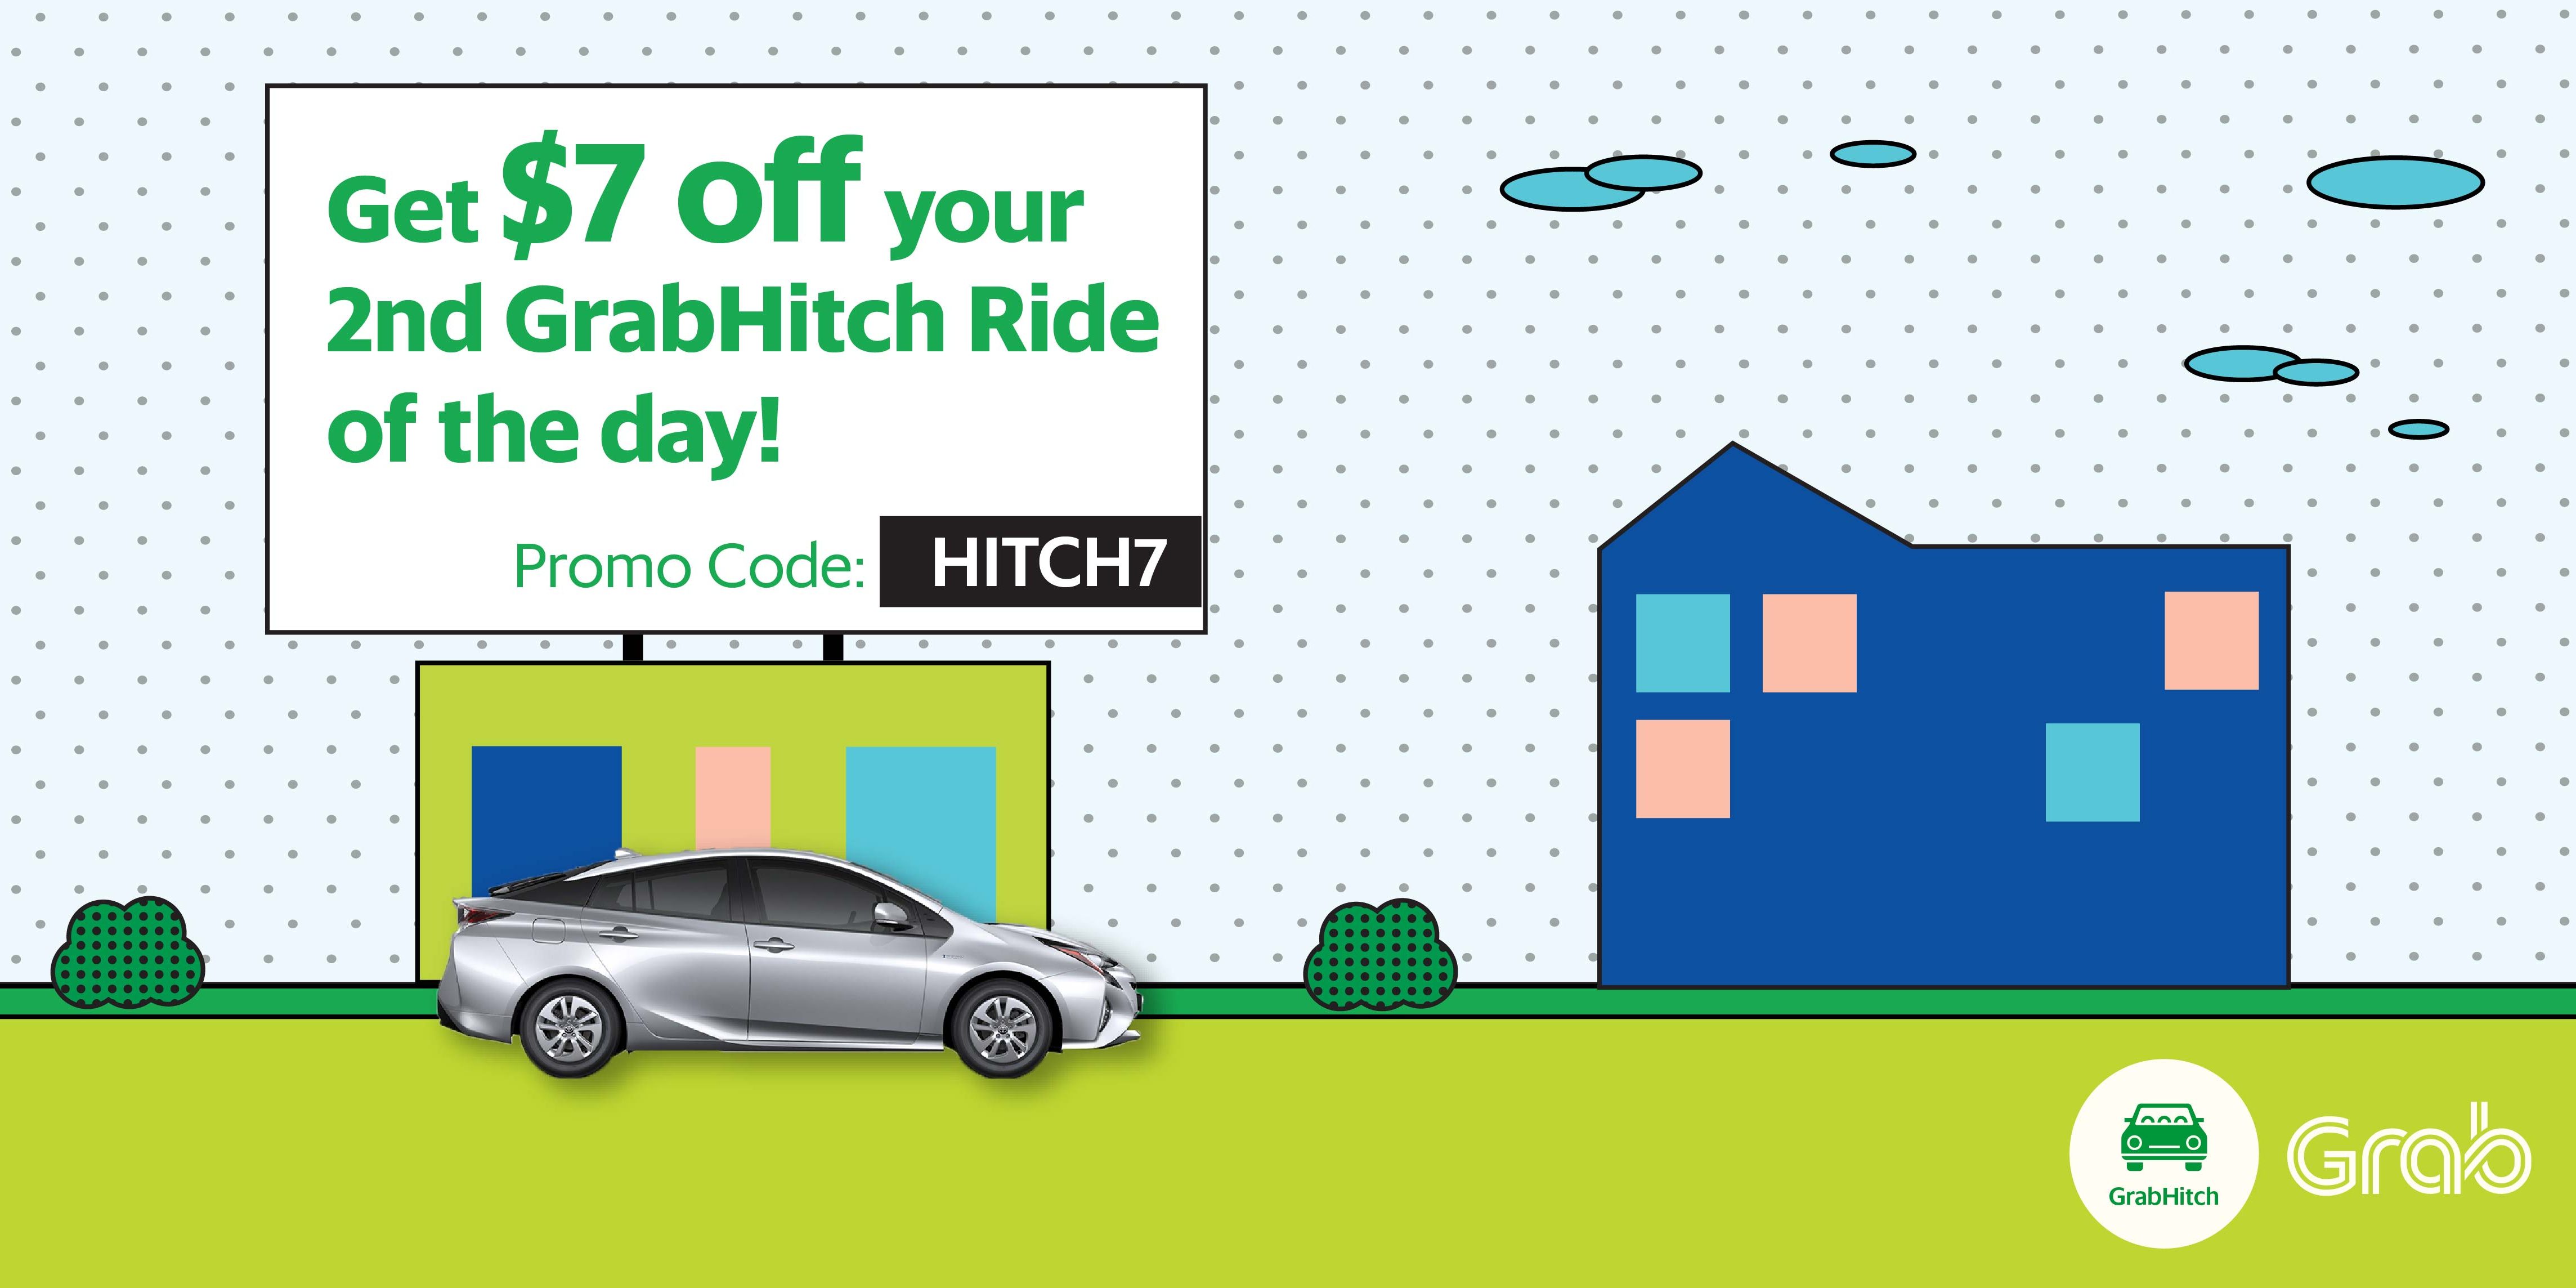 Grab Singapore Get $7 Off 2nd GrabHitch Ride of the Day Promotion 15-21 May 2017